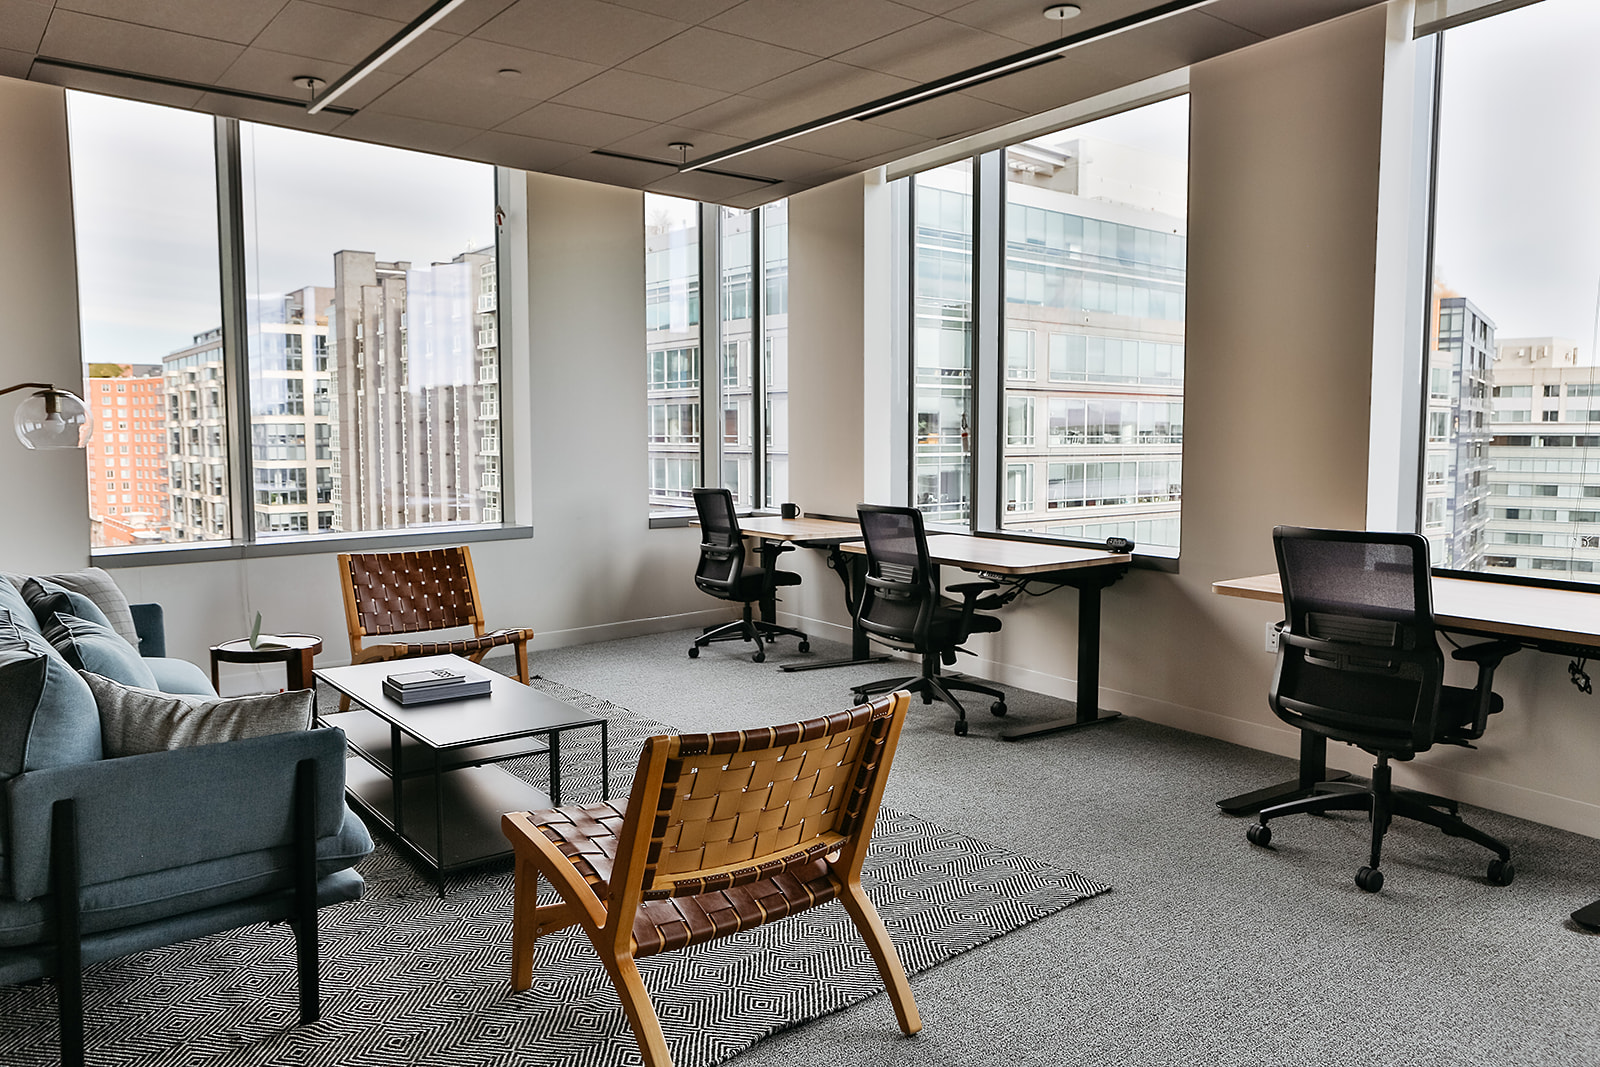 Launch Navy Yard desks in an office with windows